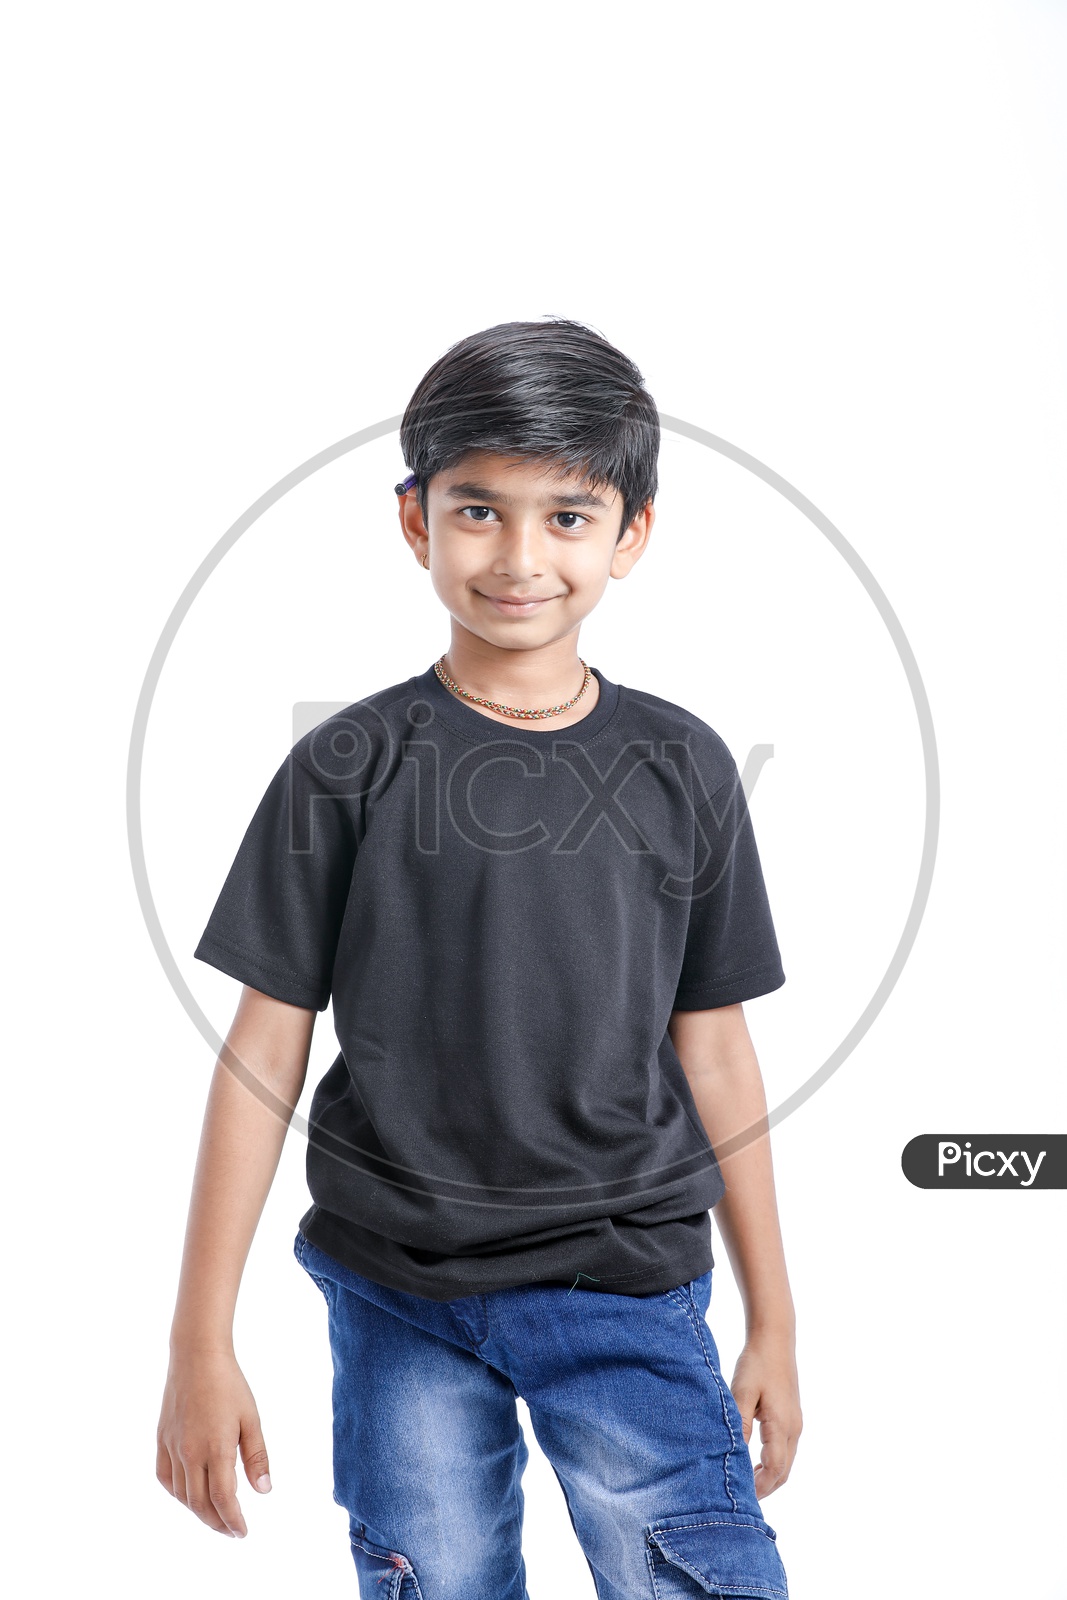 Image of Indian or Asian boy Or Kid with Expression and Smile Face On ...